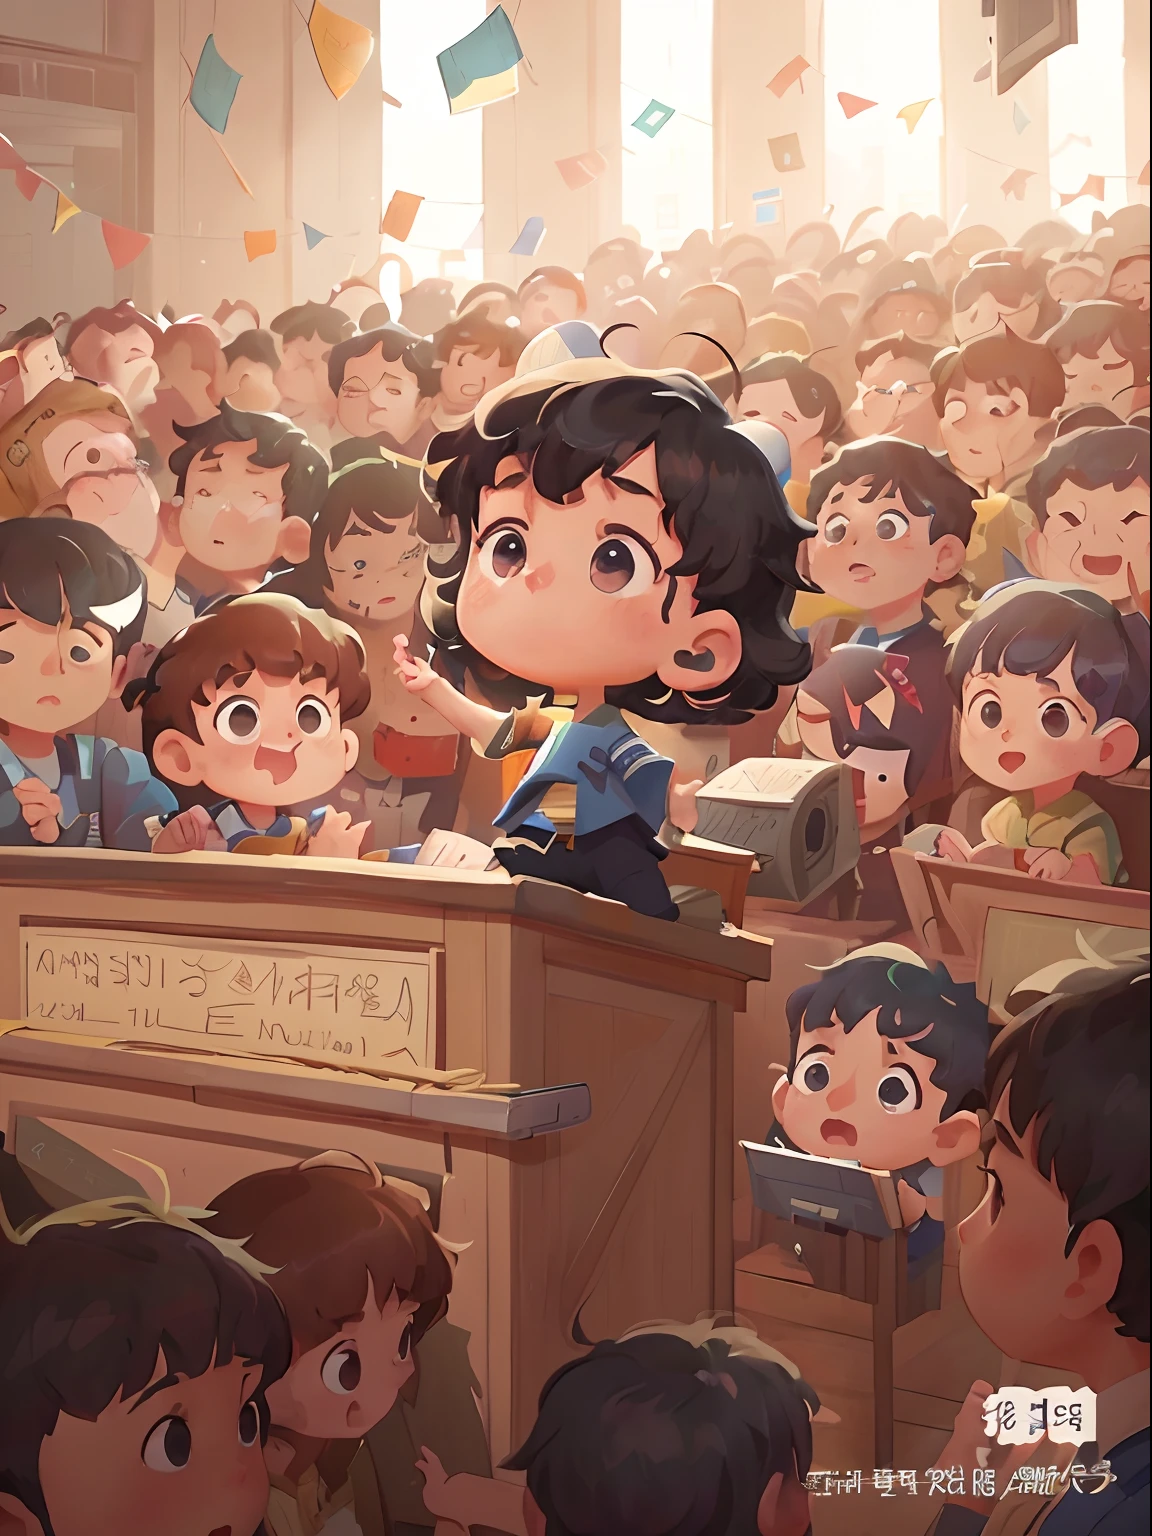 Anime illustration of a boy in a police uniform addressing the crowd, (police uniforms，Blue short-sleeved uniform，black long pants）Kawasi, lovely digital painting, Stand on the podium, A typical anime auditorium, author：Zhang Shengqi, author：Yi Renwen, author：Ryan Yee, atey ghailan 8 k, by Yang J, author：Lee Jeon-suk, by Kubisi art, Auditorium background, pixiv daily ranking，The audience was full(police uniforms，Blue short-sleeved uniform，black long pants）